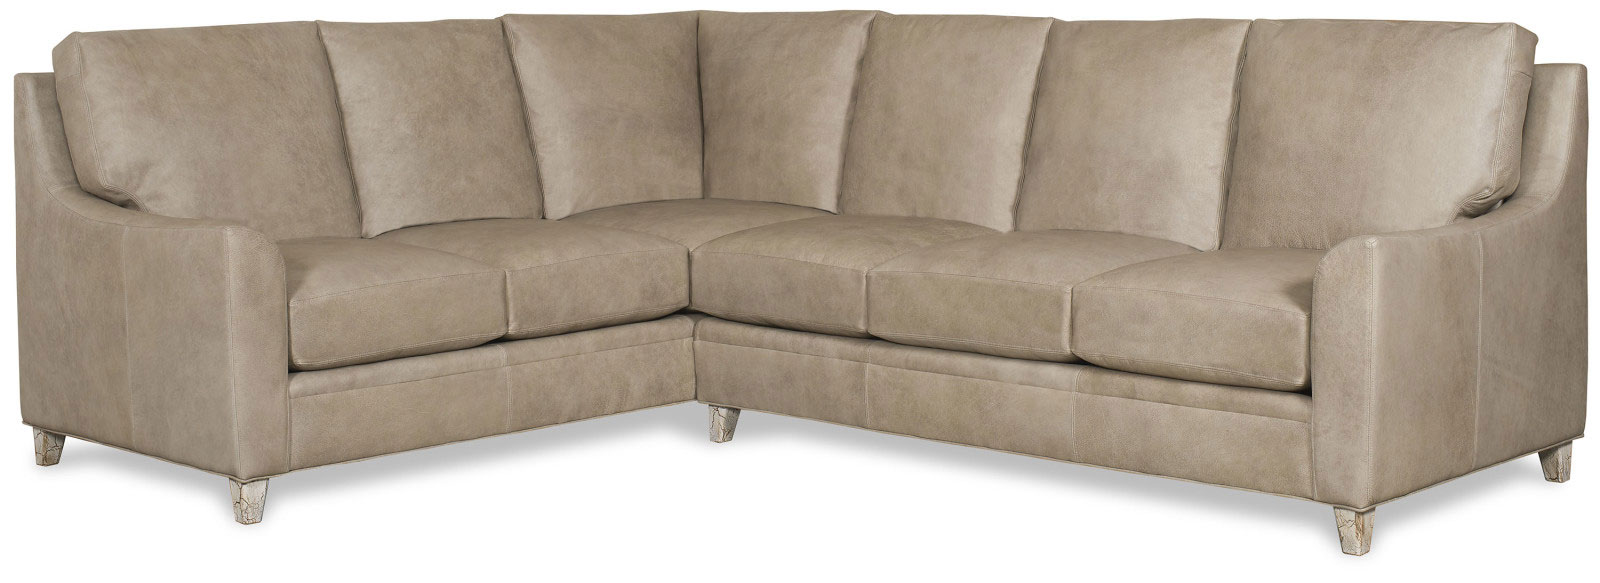 2245 Frazier Sectional by McKinley Leather